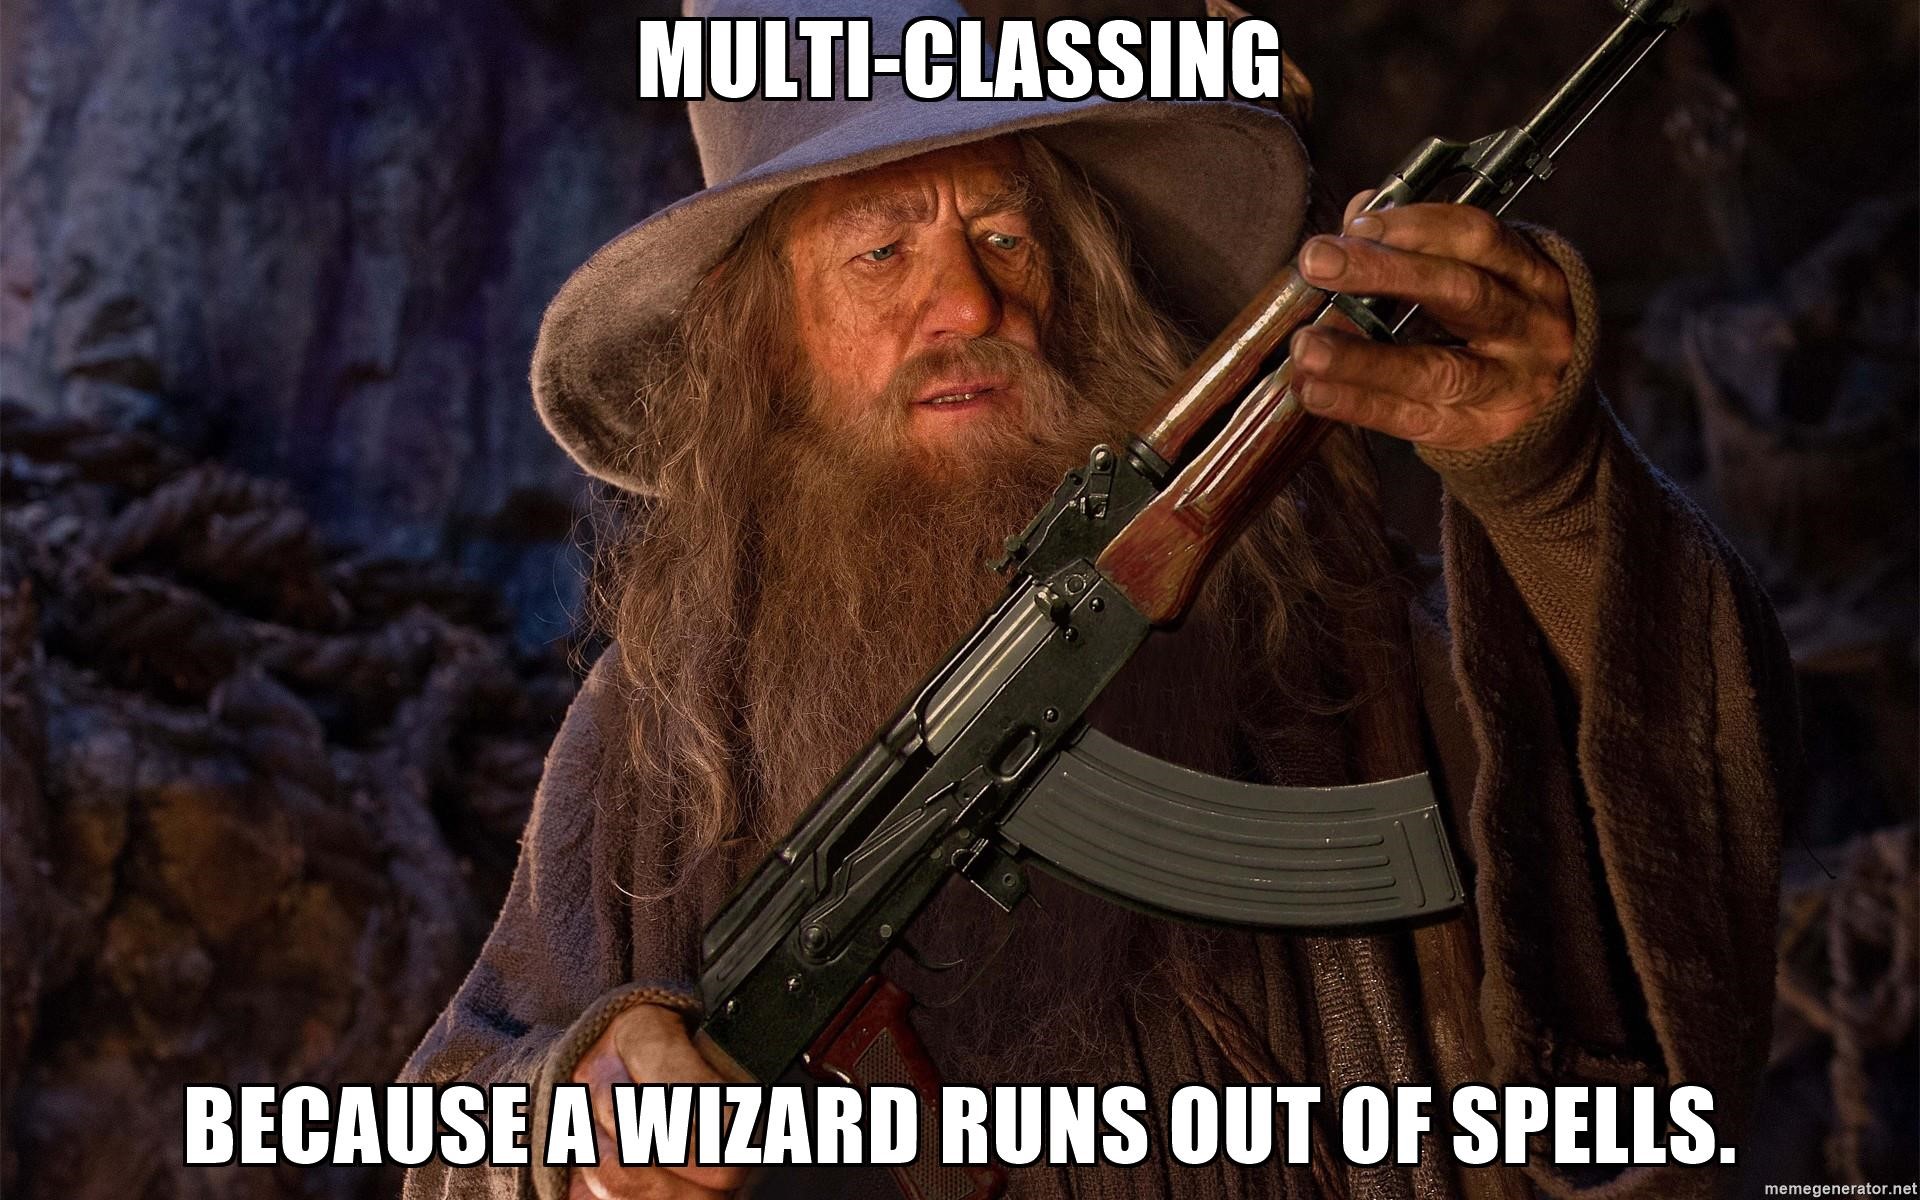 10 Hilarious Memes on GANDALF From Lord of the Rings QuirkyByte